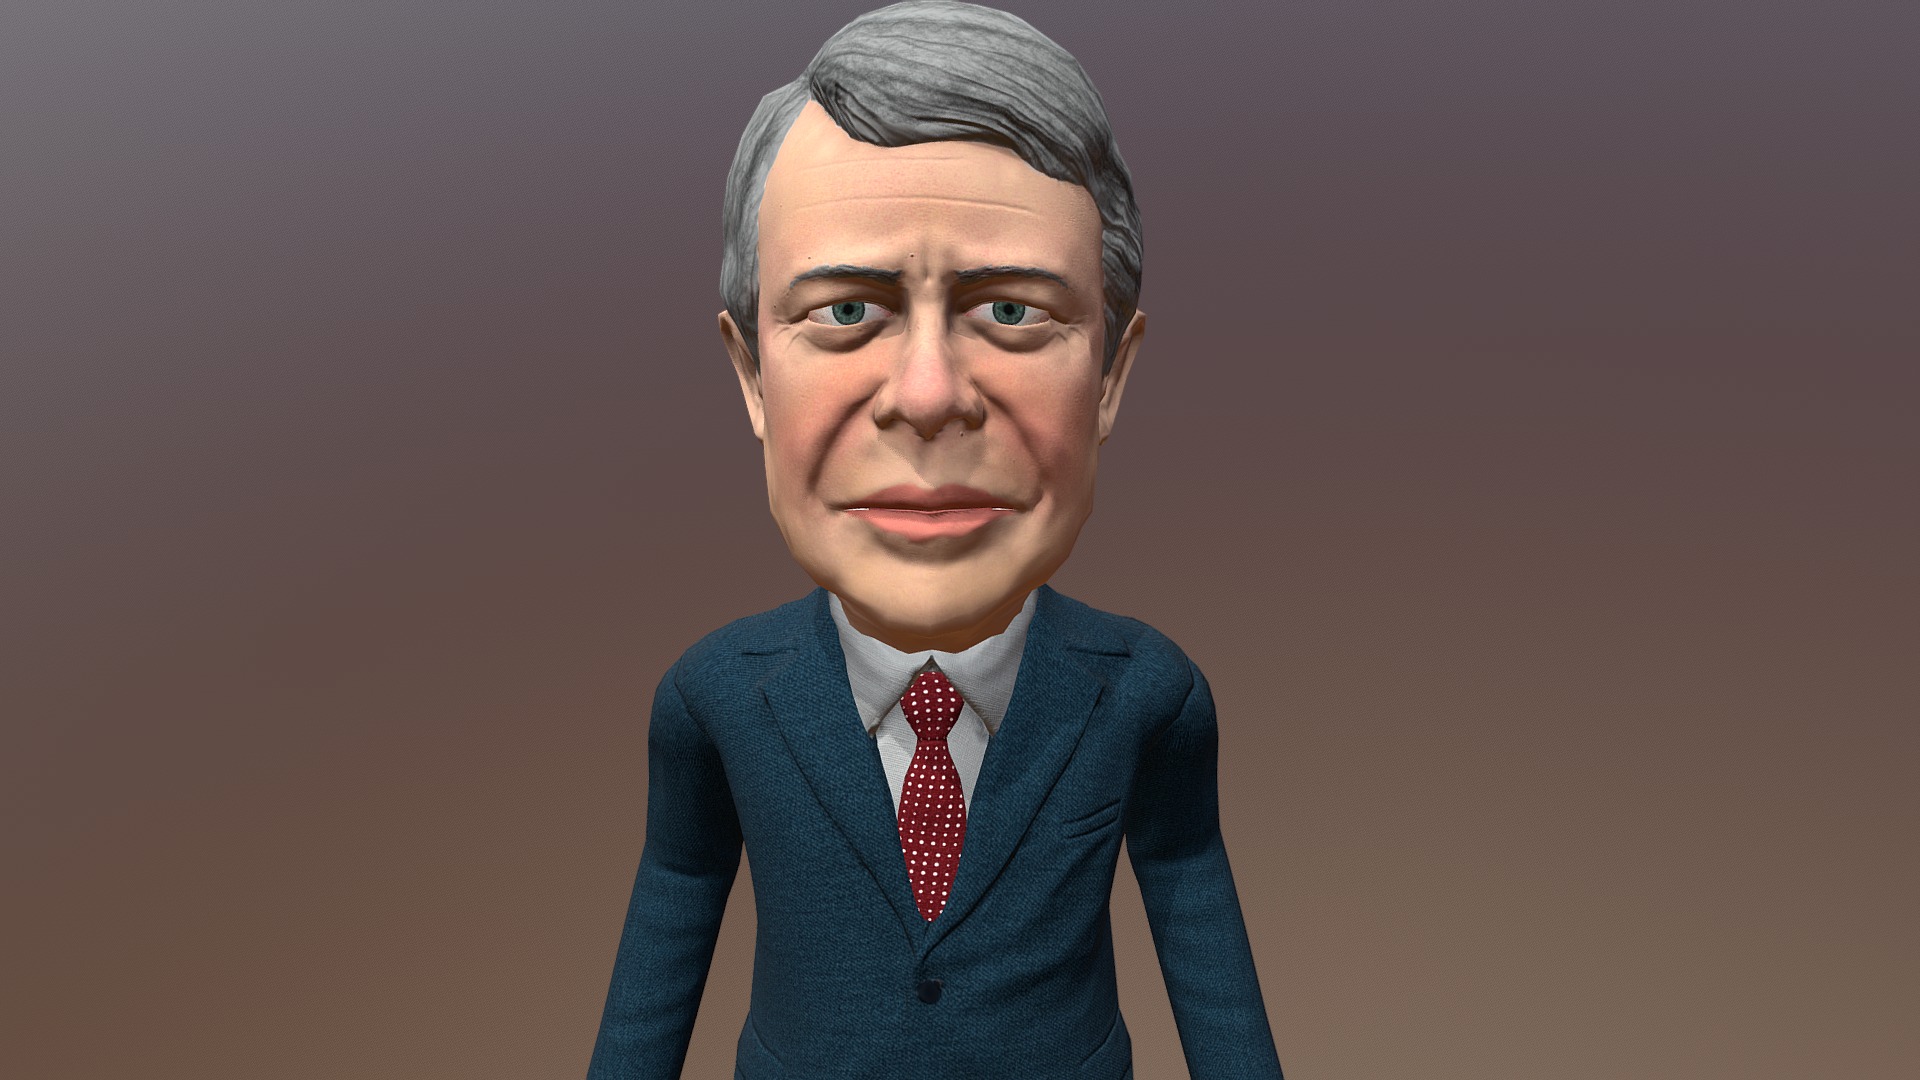 3D model Jimmy Carter caricature - This is a 3D model of the Jimmy Carter caricature. The 3D model is about a man with a blue shirt and red tie.